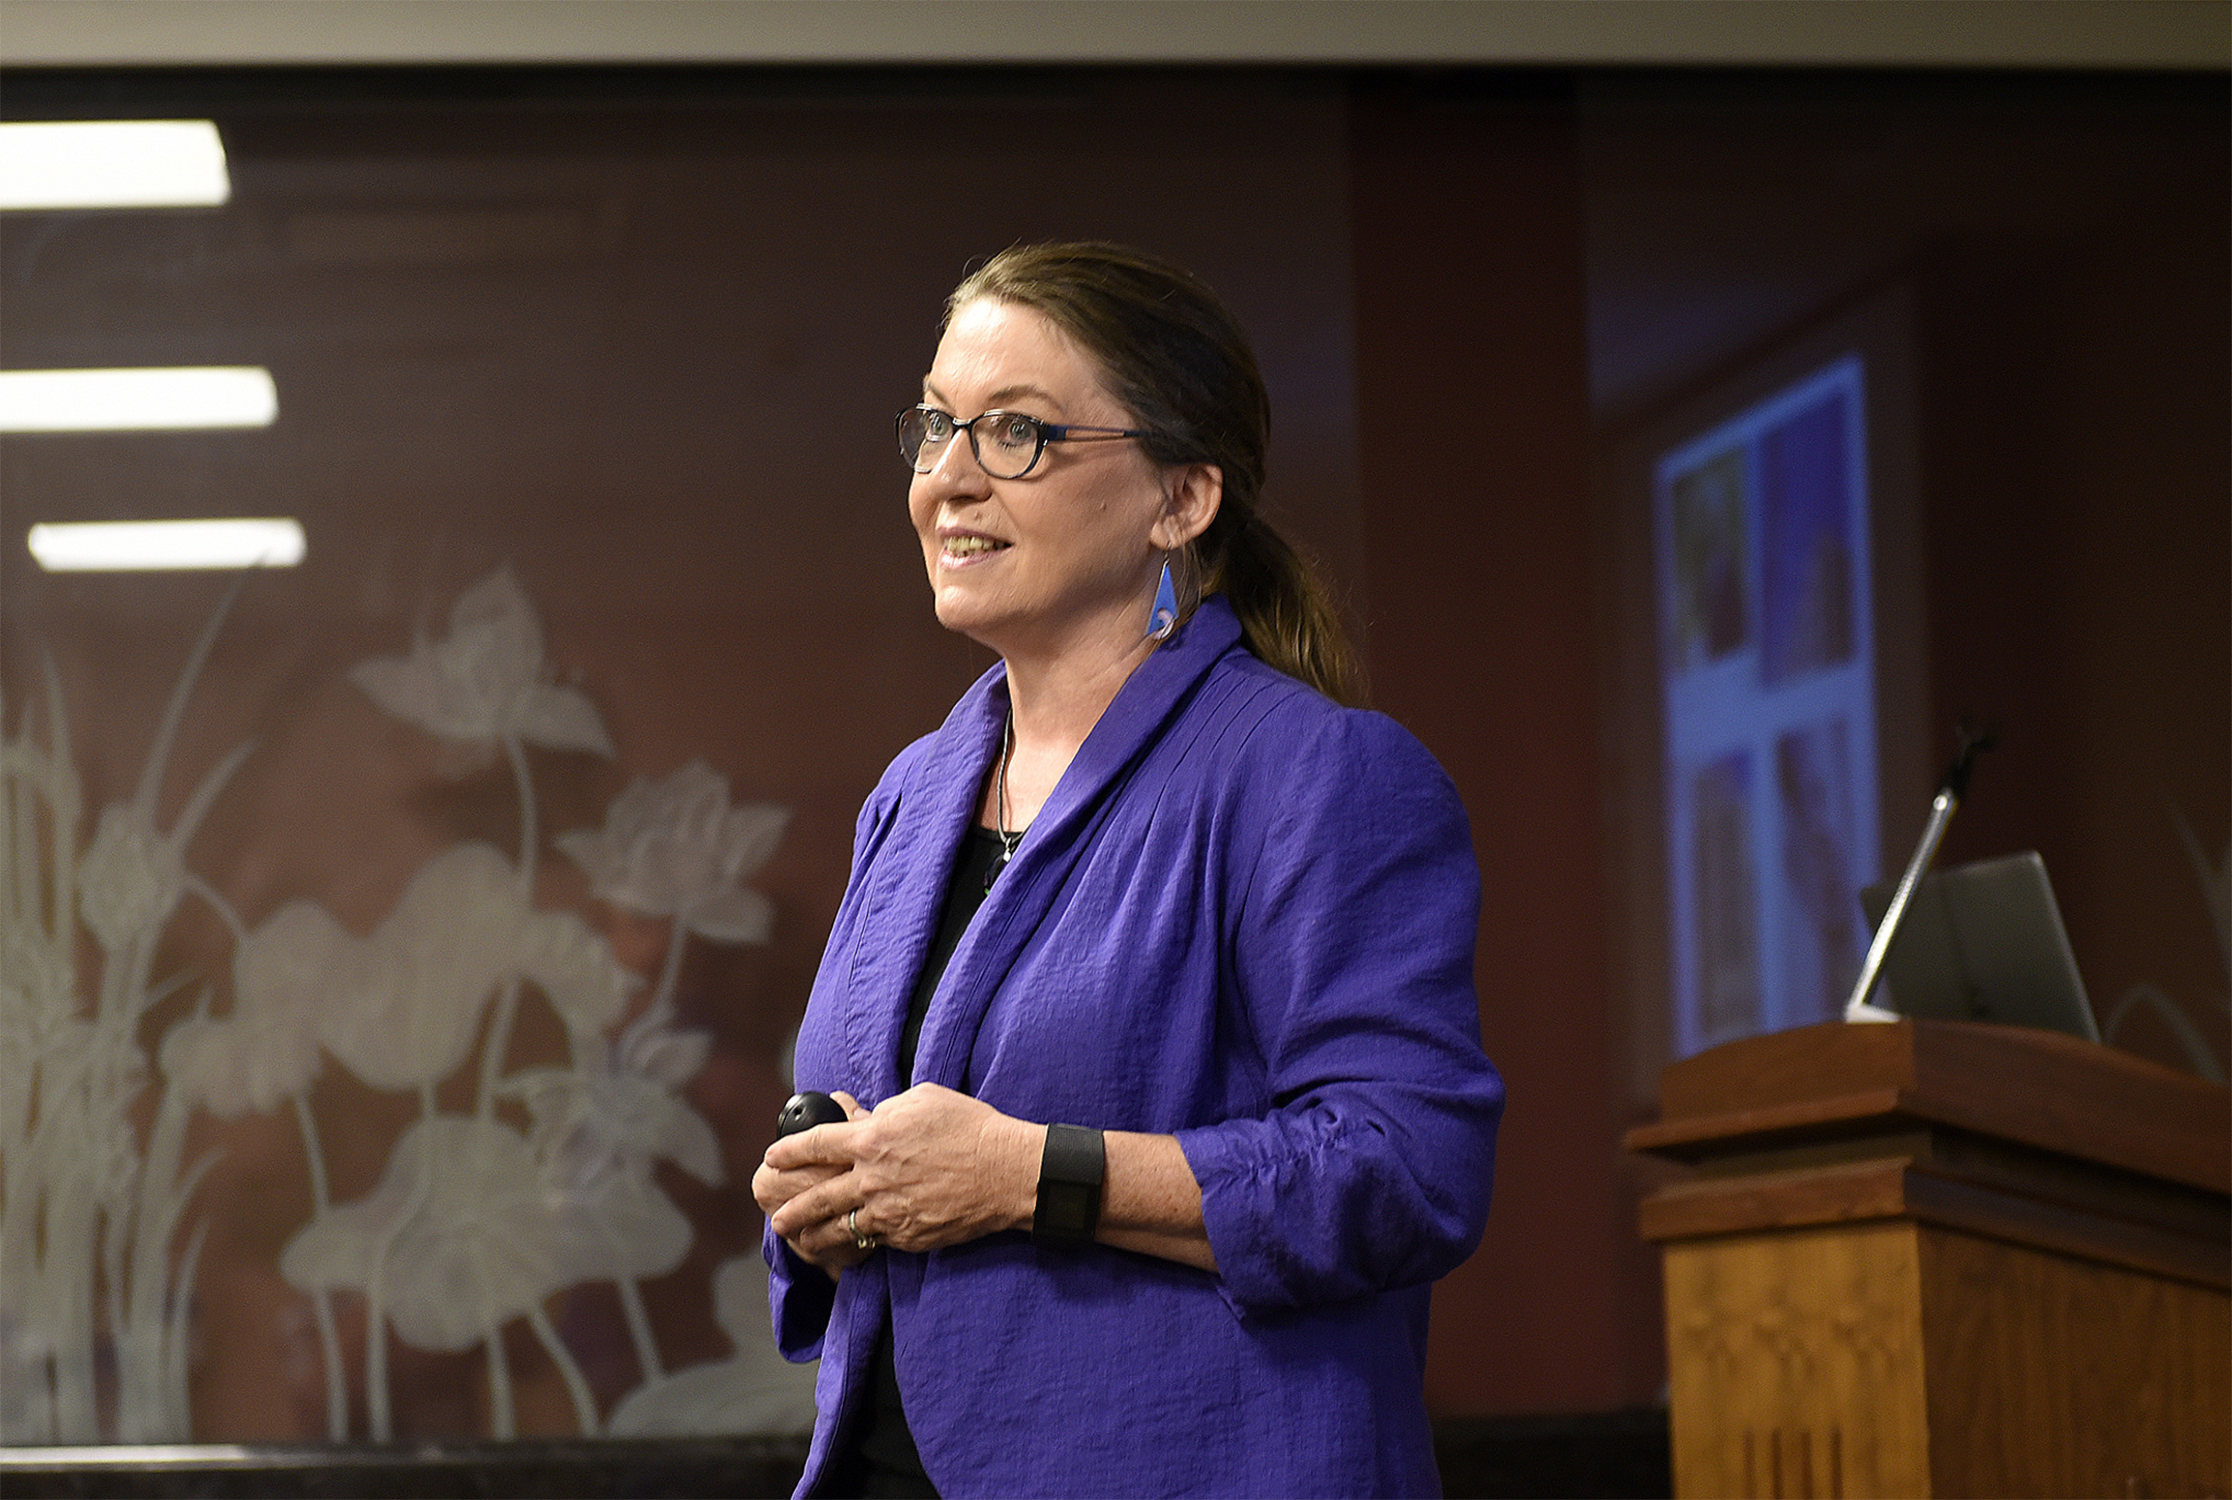 Texas A&amp;M biologist Deborah Bell Pedersen stands in front of a podium and speaks to an audience